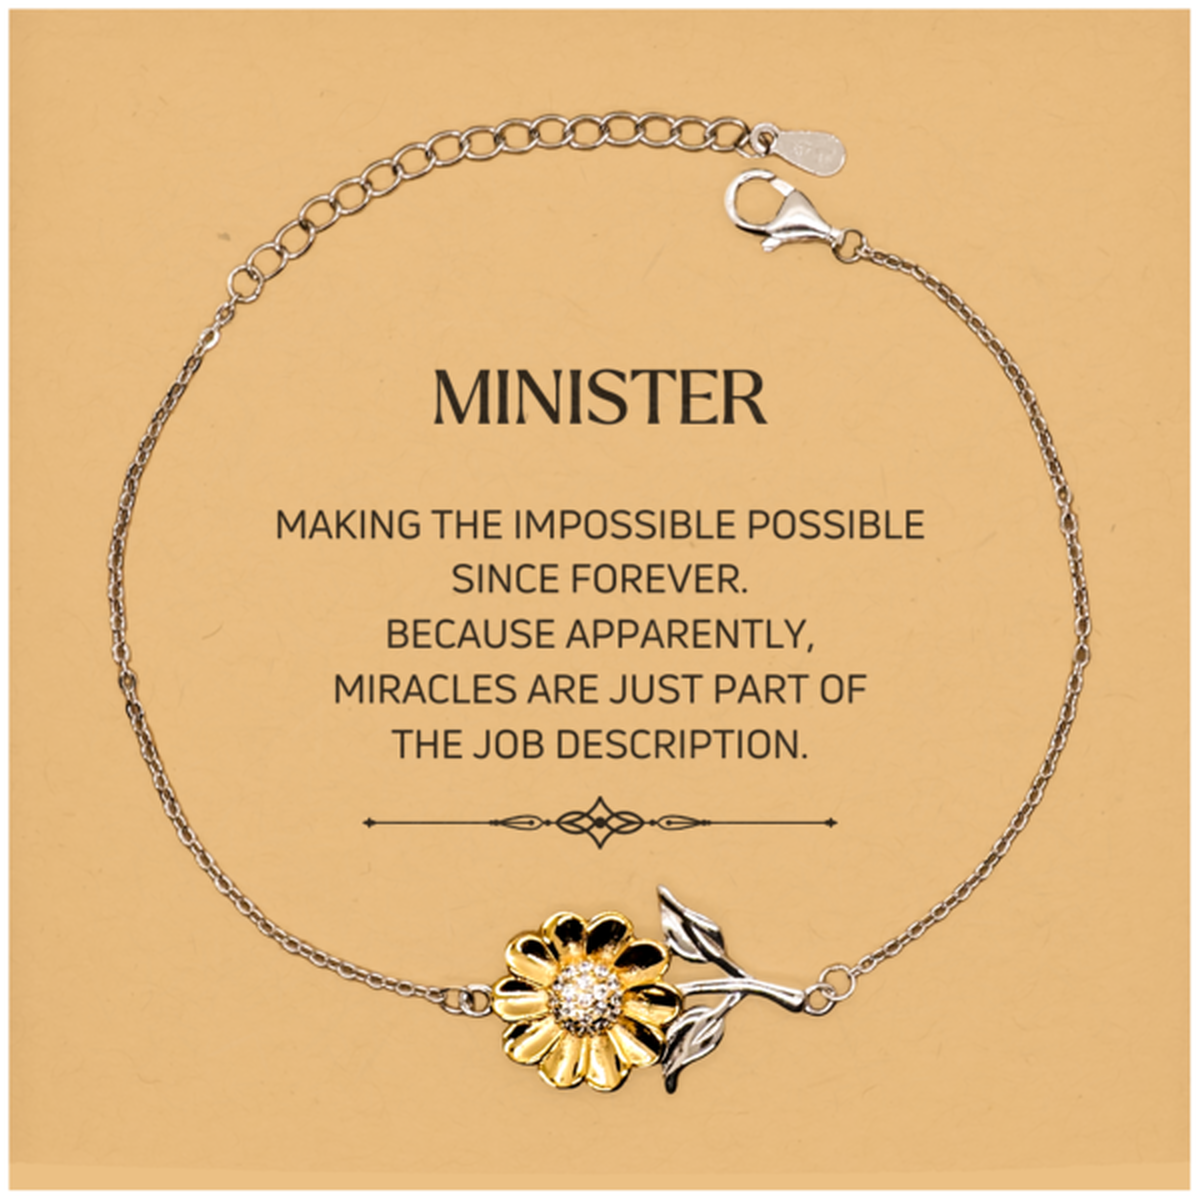 Funny Minister Gifts, Miracles are just part of the job description, Inspirational Birthday Christmas Sunflower Bracelet For Minister, Men, Women, Coworkers, Friends, Boss